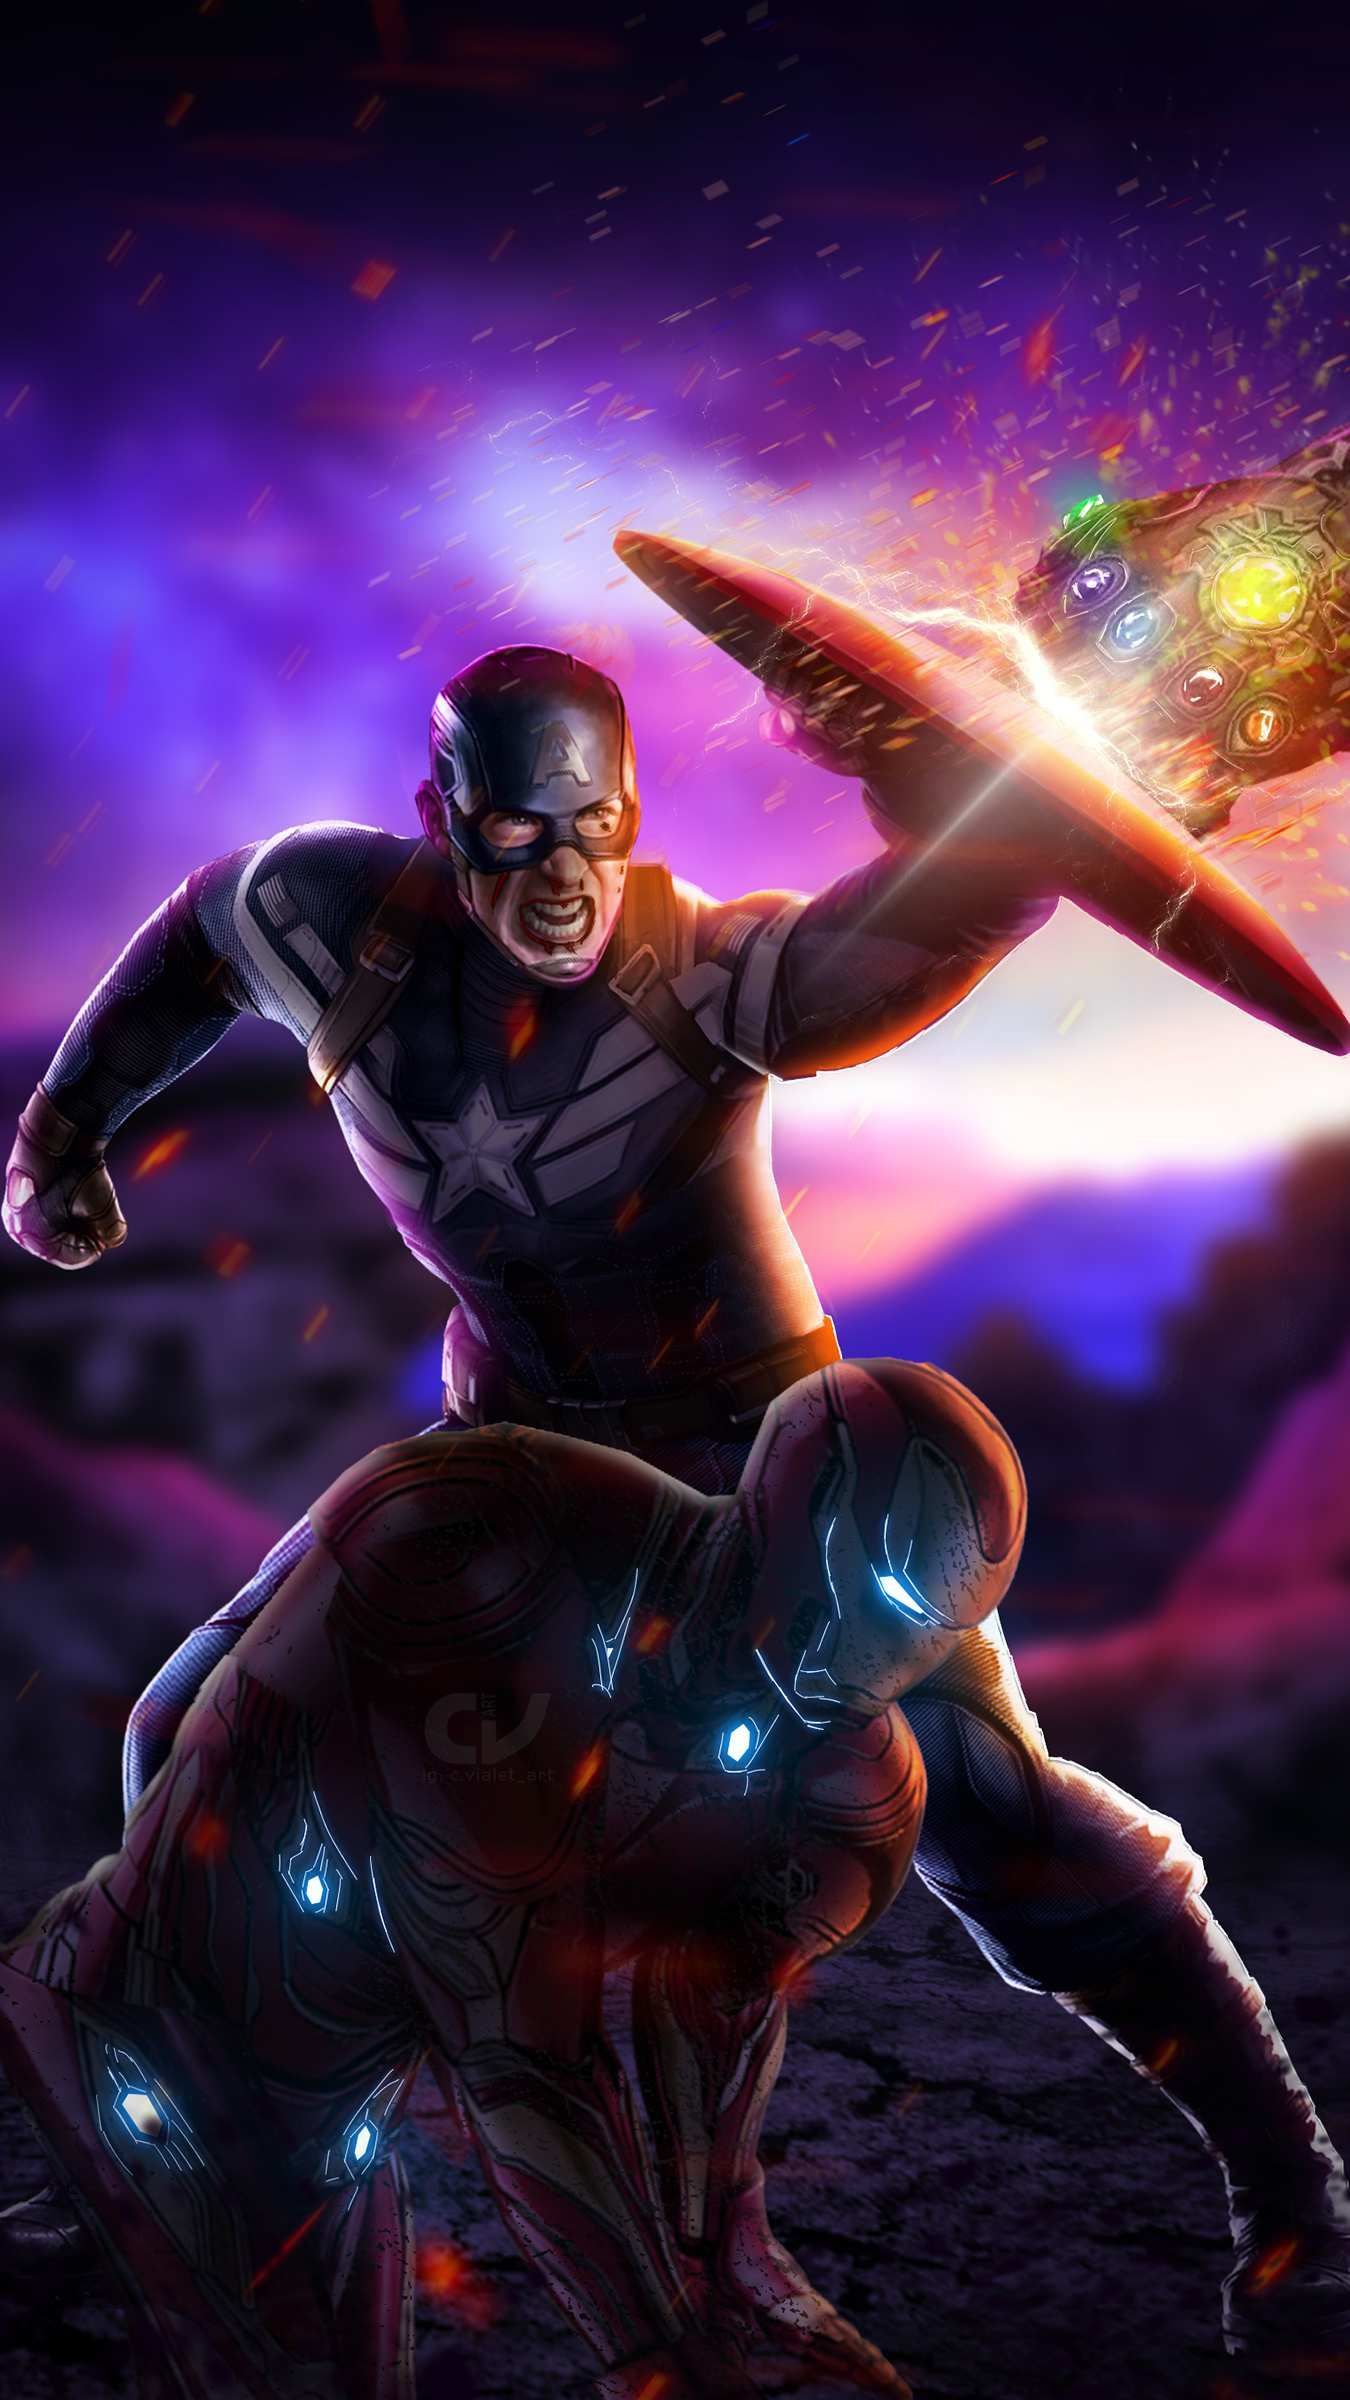 Free download Captain and Tony Fighting Thanos Avengers Endgame